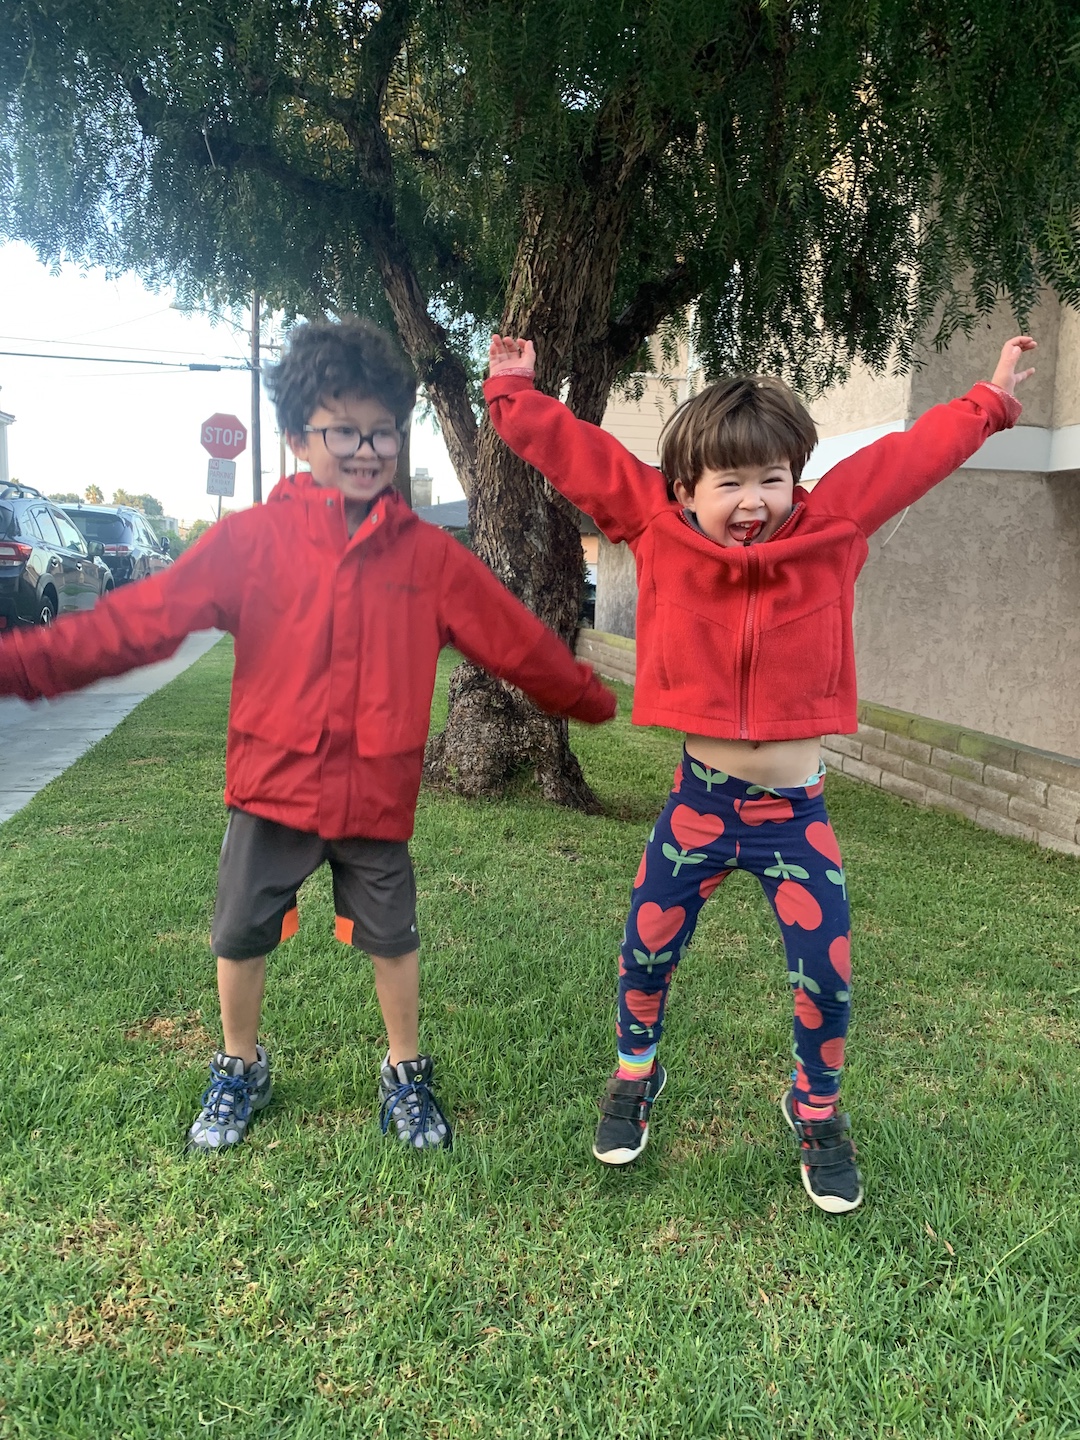 Compass’ Online Learning Program scholars jump in joy in their red outfits on red ribbon week. Emotional and mental health is important for all ages.